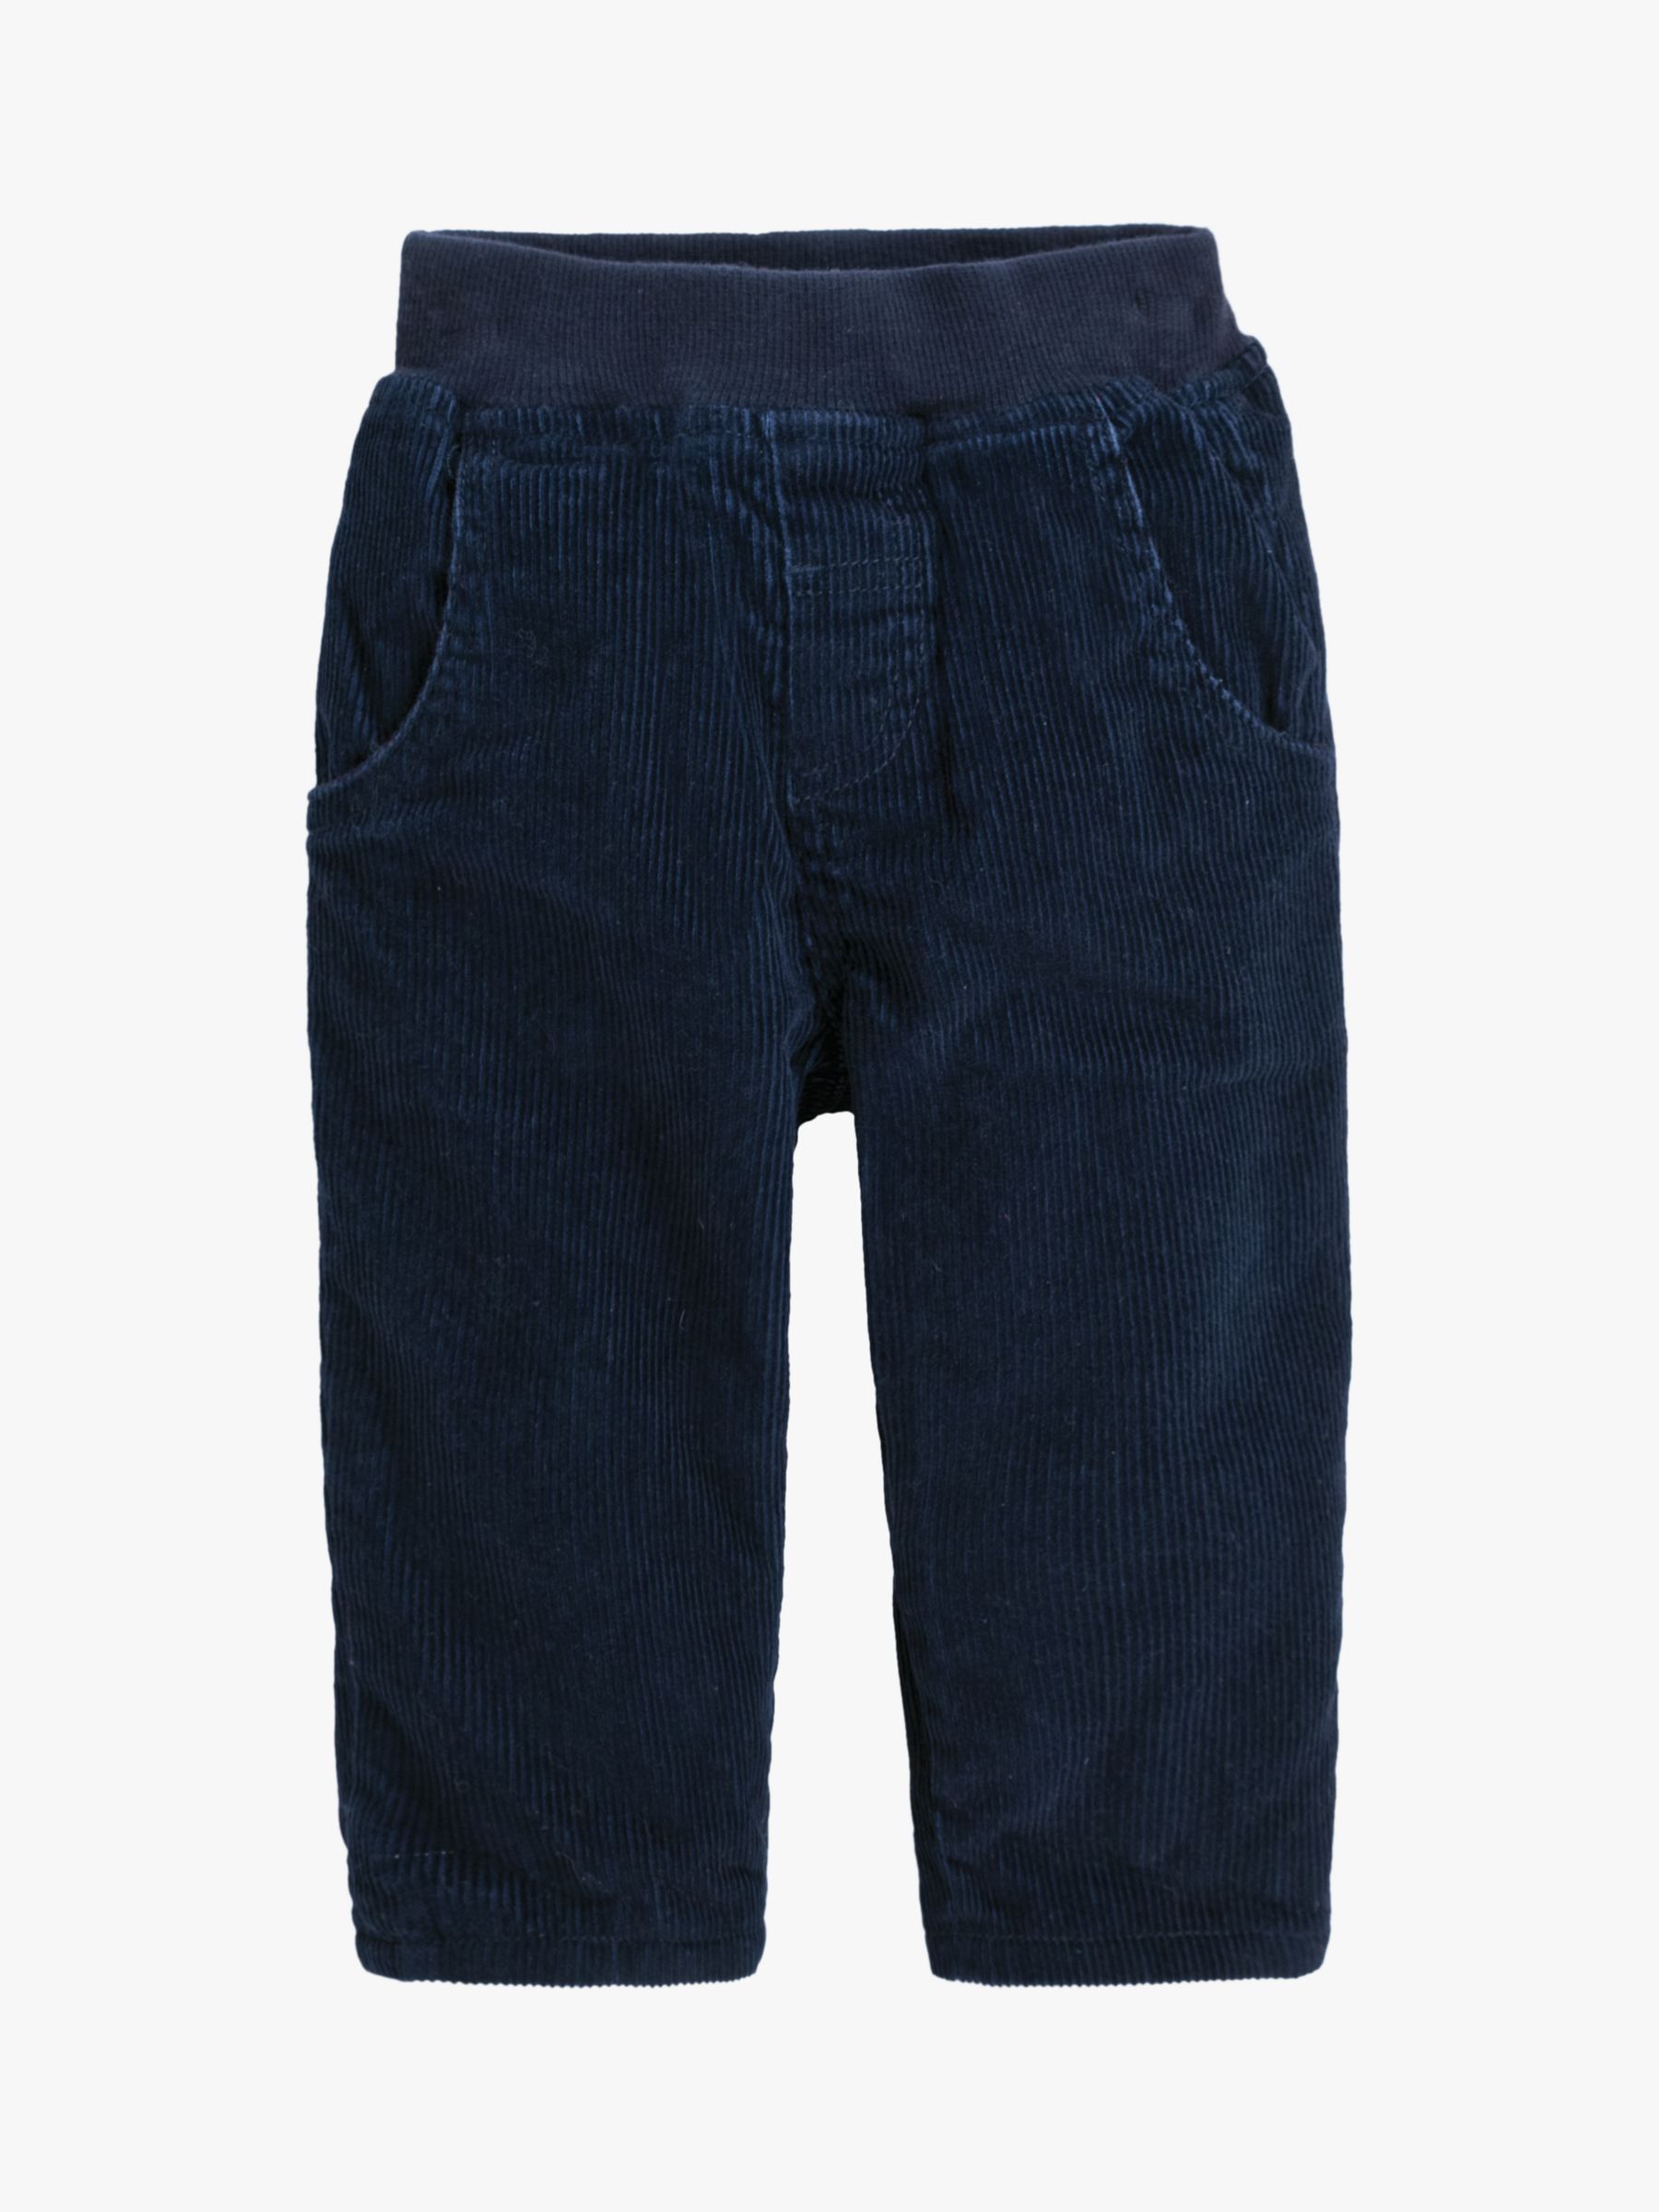 Buy JoJo Maman Bébé Baby Cord Pull Up Trousers, Navy Online at johnlewis.com